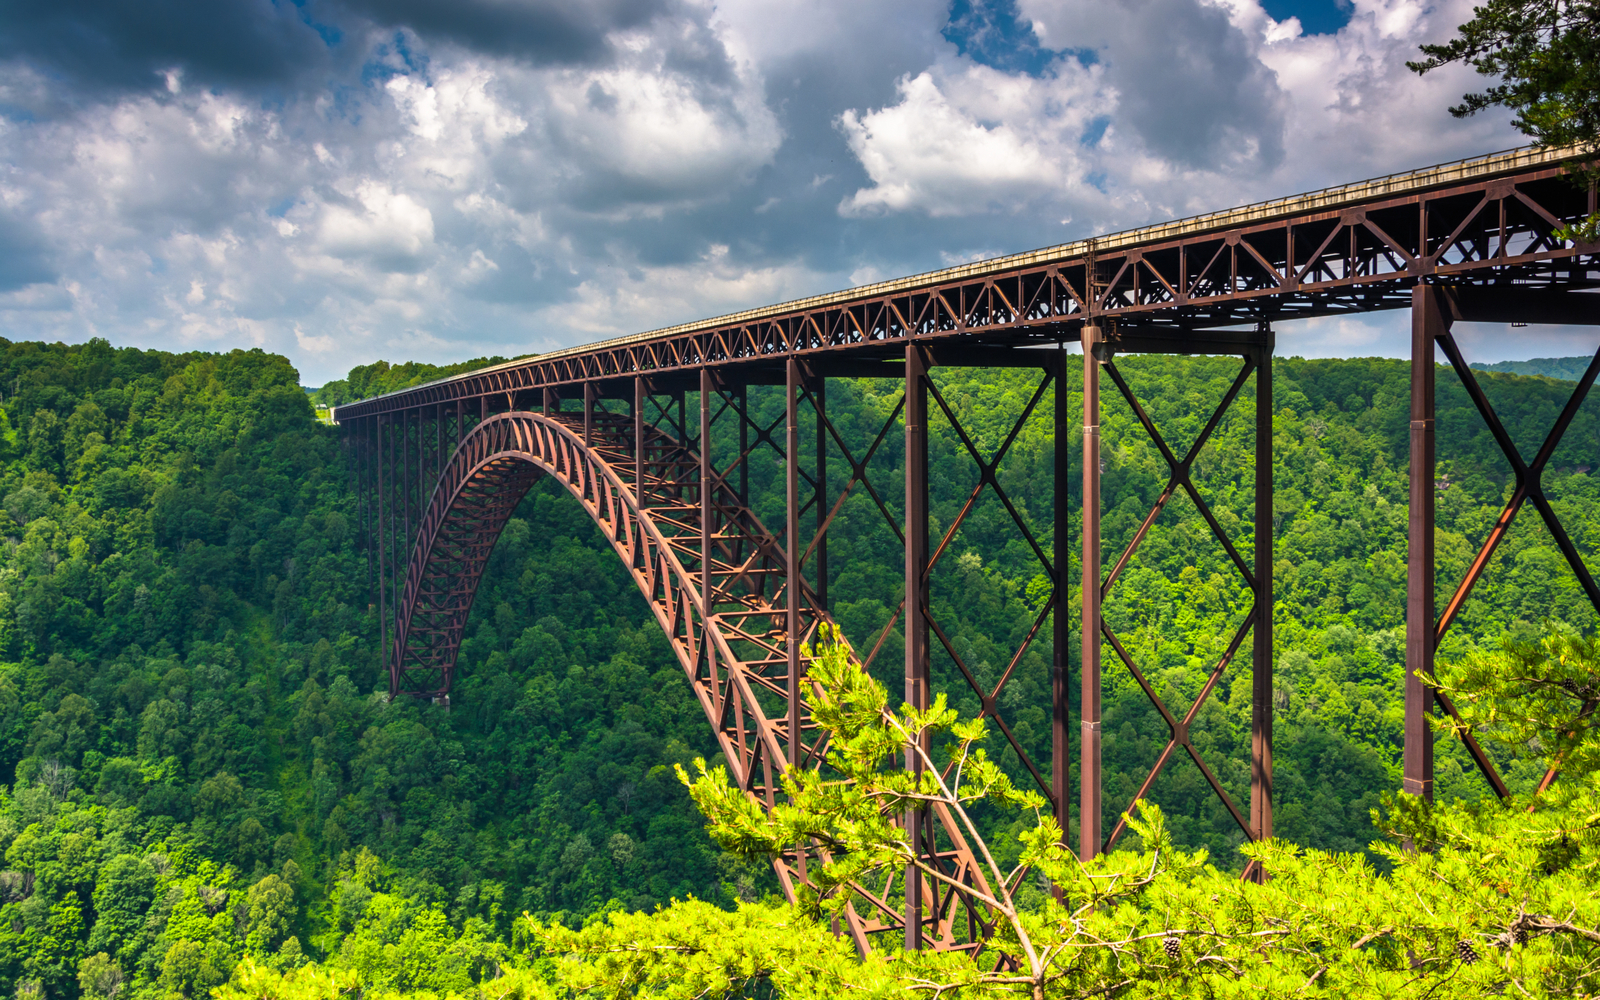 New River Gorge Bridge, one of the best West Virginia Attractions, as seen from the Canyon Rim